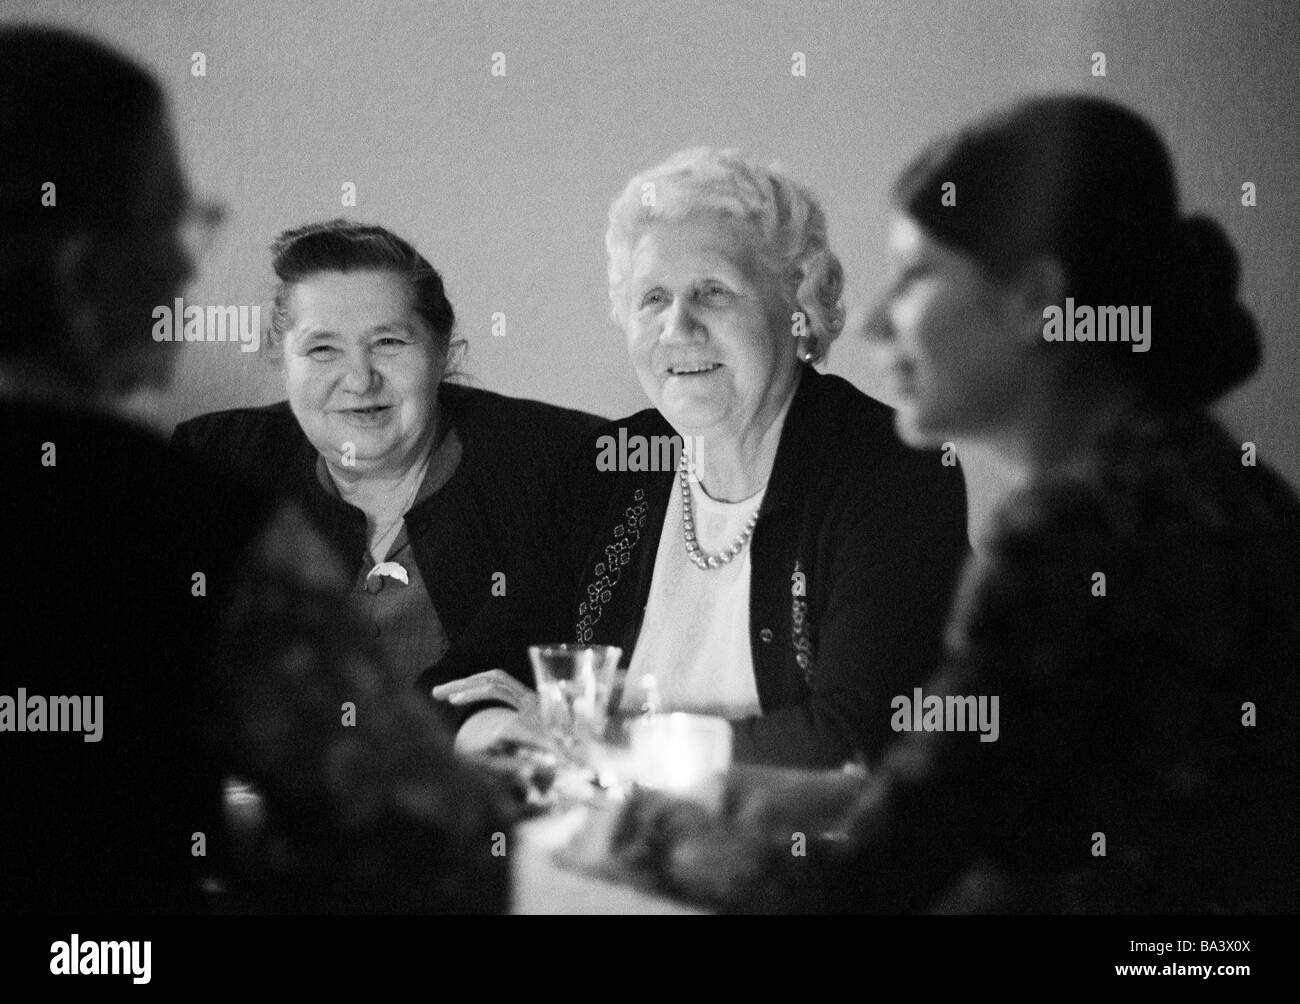 Seventies, black and white photo, people, two older women sit together with a young woman, social, laughter, amusement, aged 70 to 80 years, aged 25 to 35 years, Christmas, Christmas Eve for older people, organizer was the Catholic Youth of Bottrop, Ruhr area, North Rhine-Westphalia Stock Photo